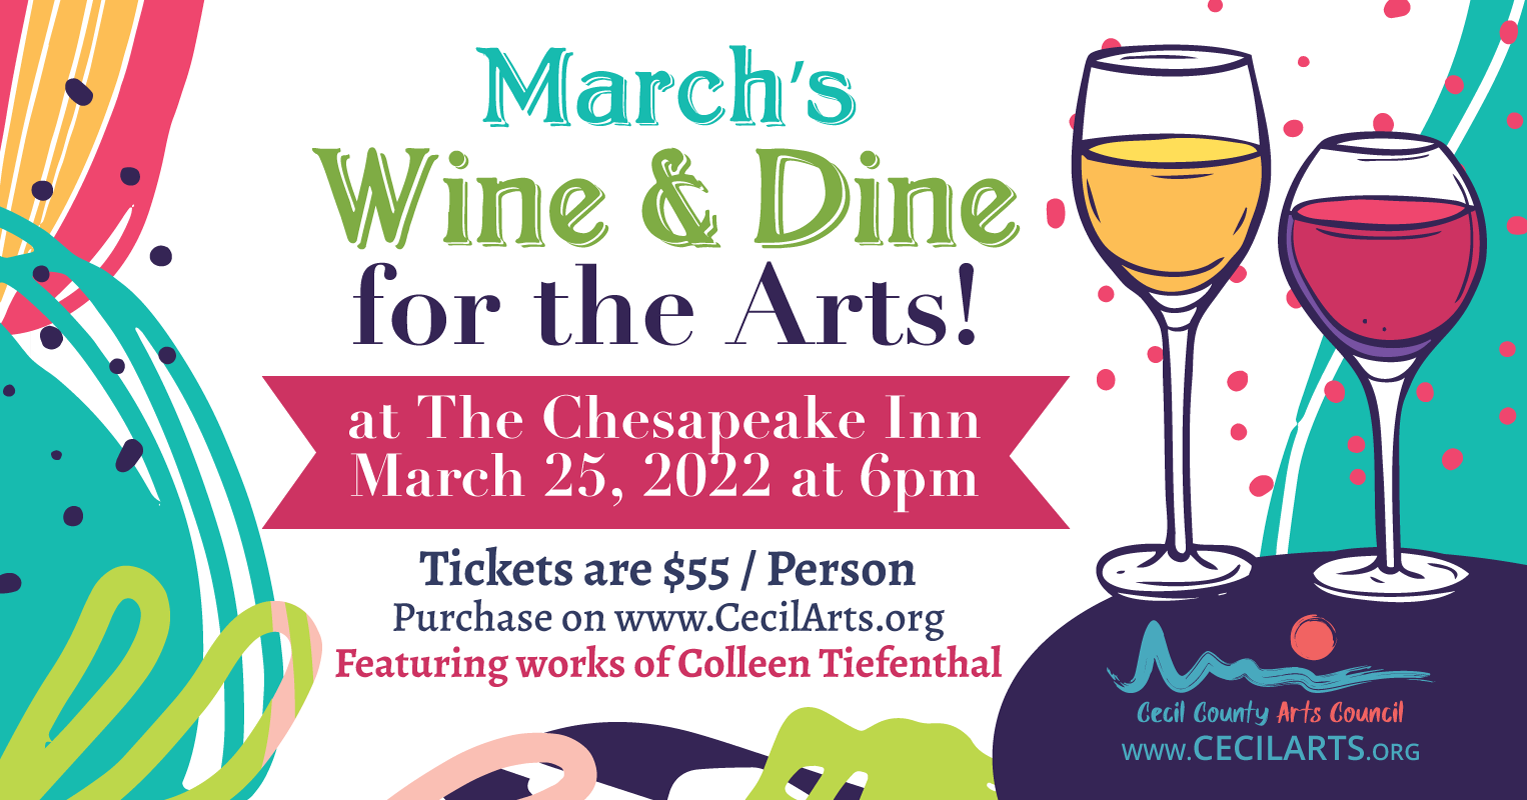 March’s Wine & Dine for the Arts Cecil County Arts Council